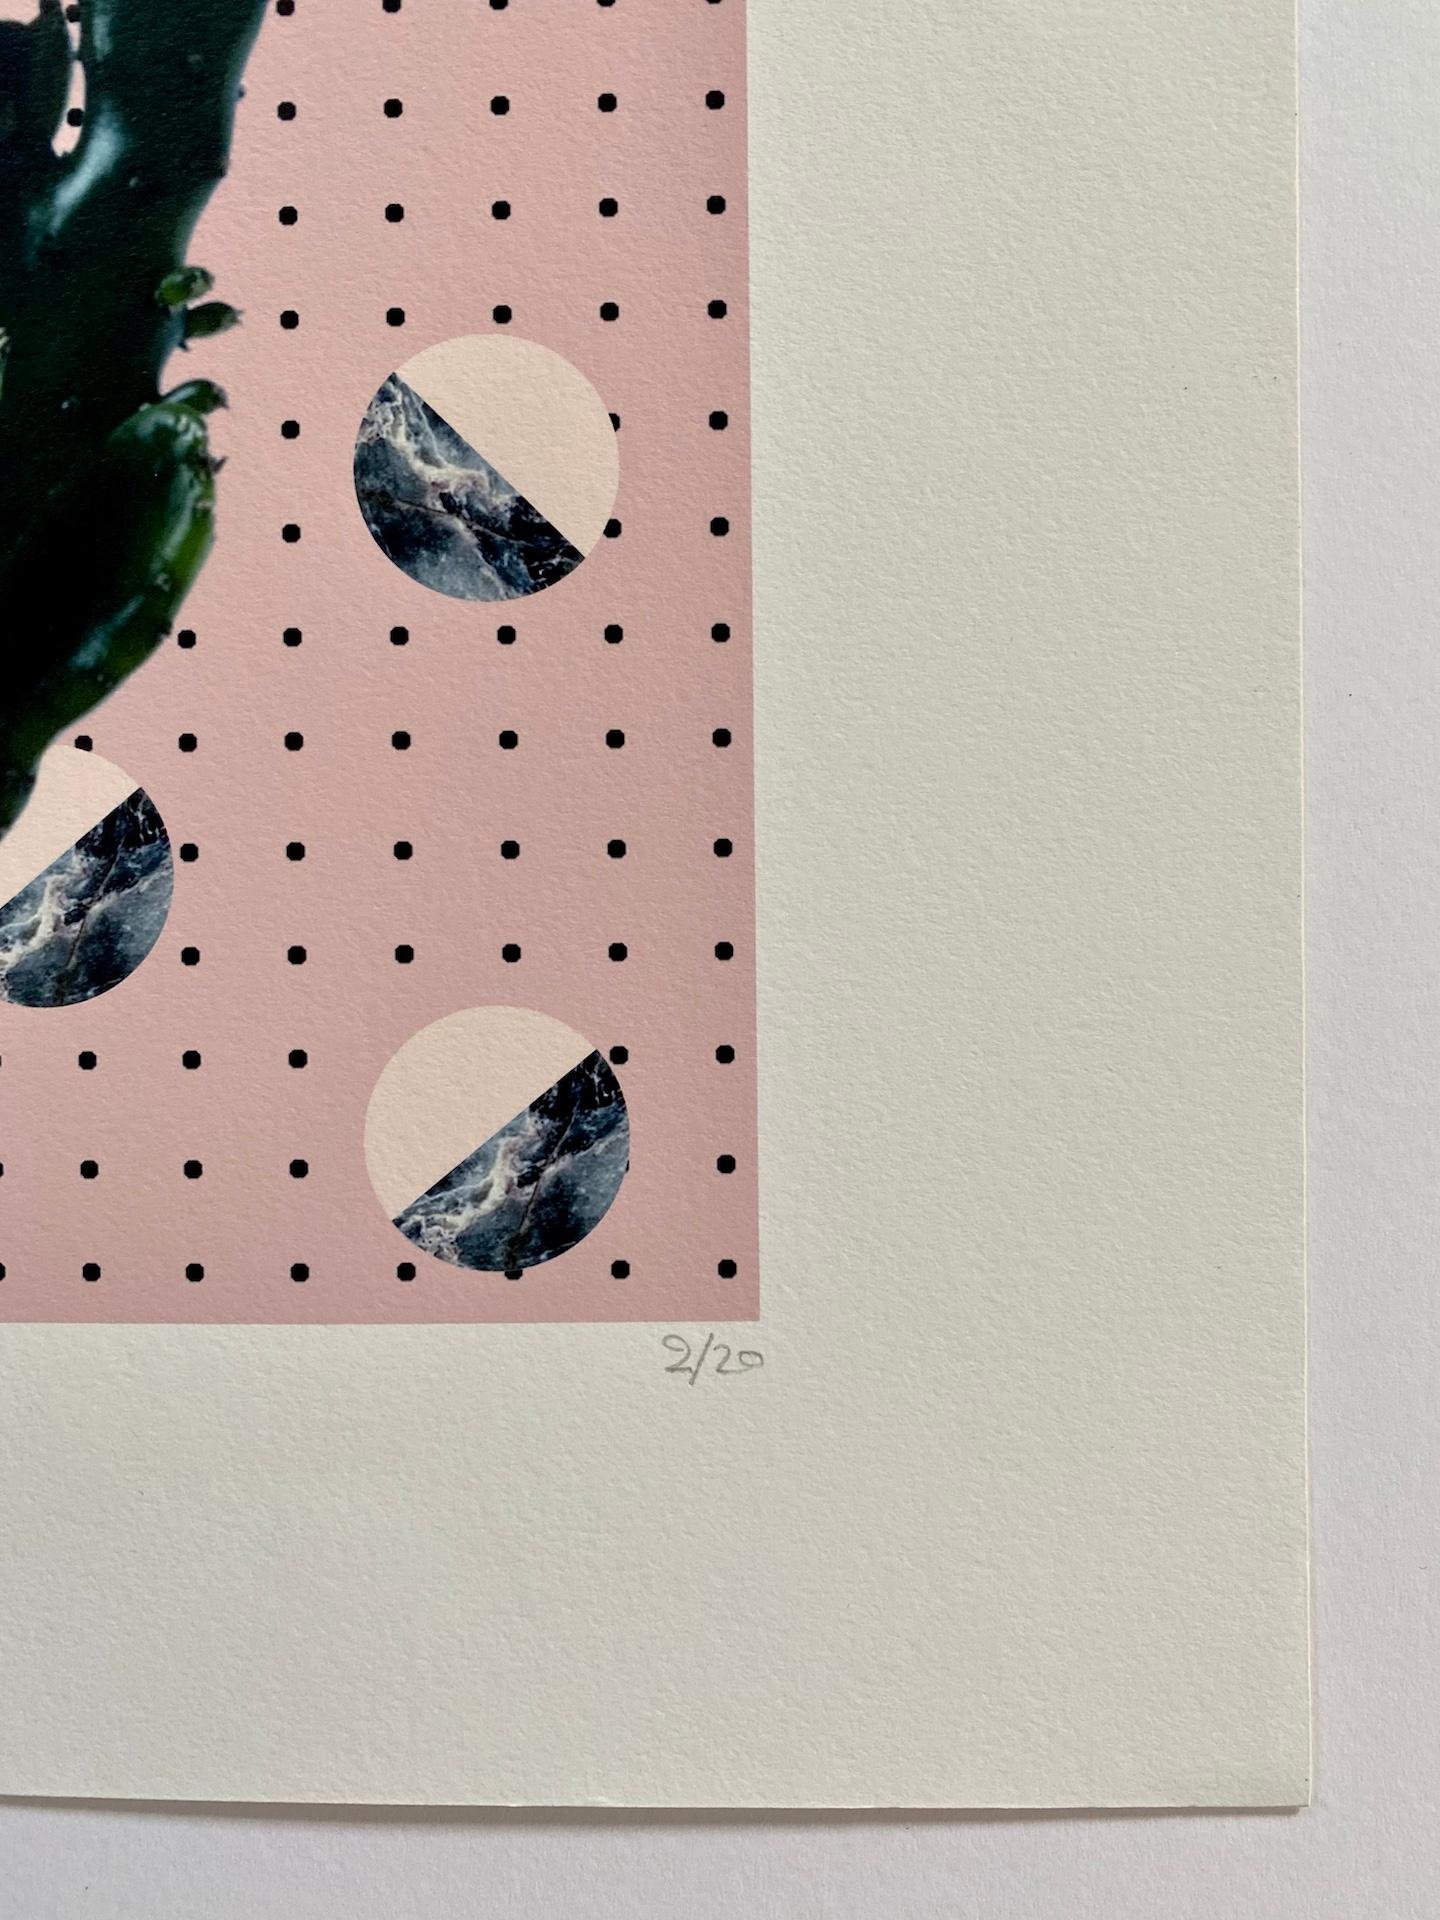 Fei Alexeli
Plants and Marble #2
Limited Edition Print
Giclee Print
Edition of 20
Image Size : H 38cm x W 27cm
Sheet Size: H 50cm x W 40cm
(Please note that in situ images are purely an indication of how a piece may look).

Plants and Marble #2 is a